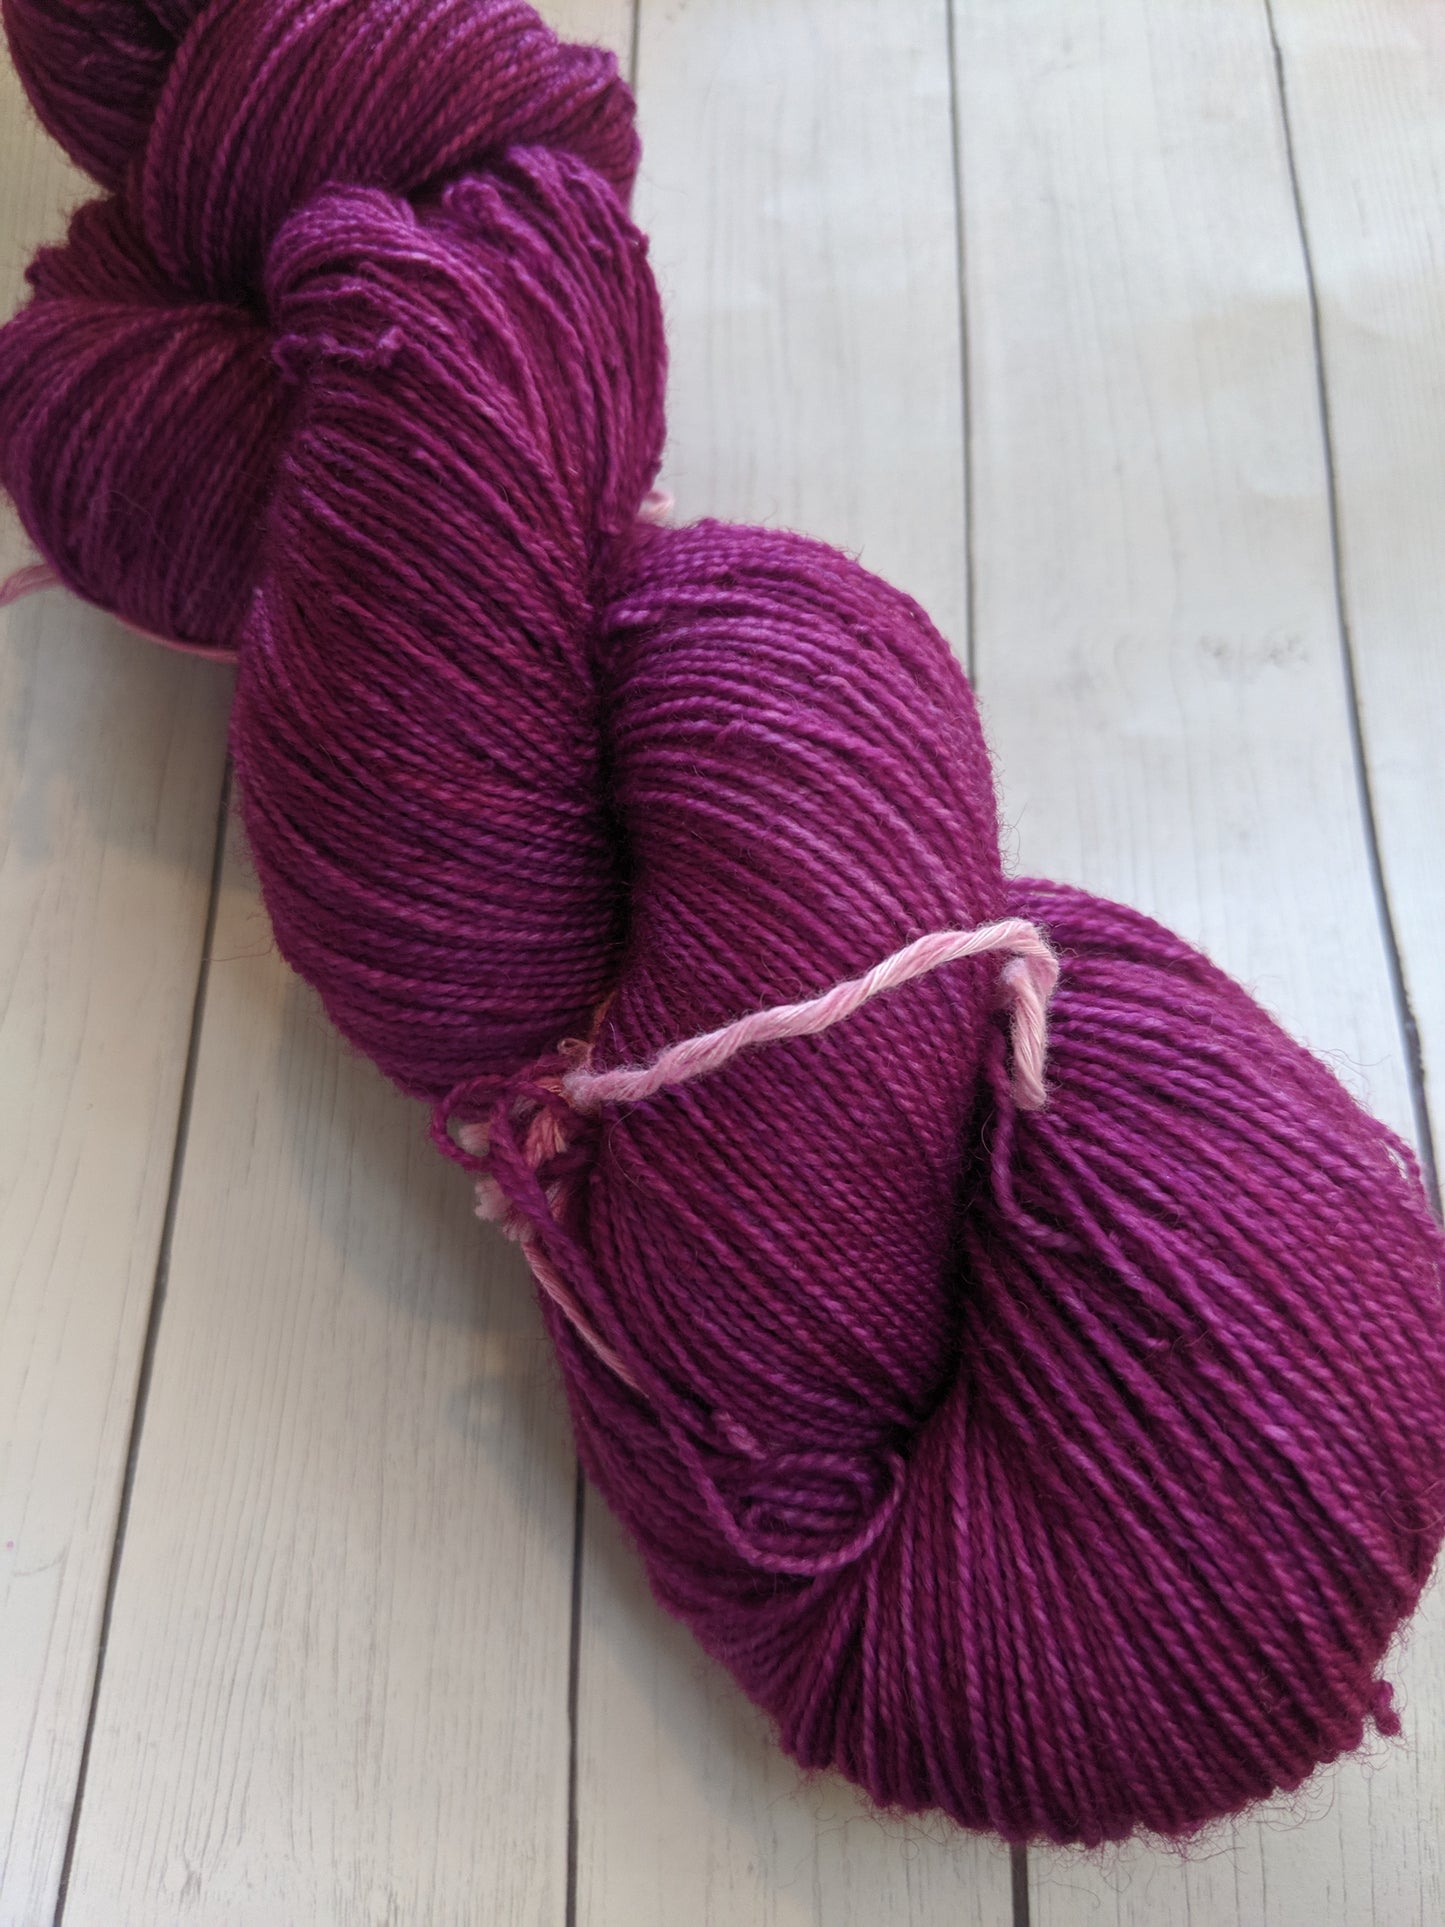 Radiant Orchid - (Discontinued) Delia 80/20